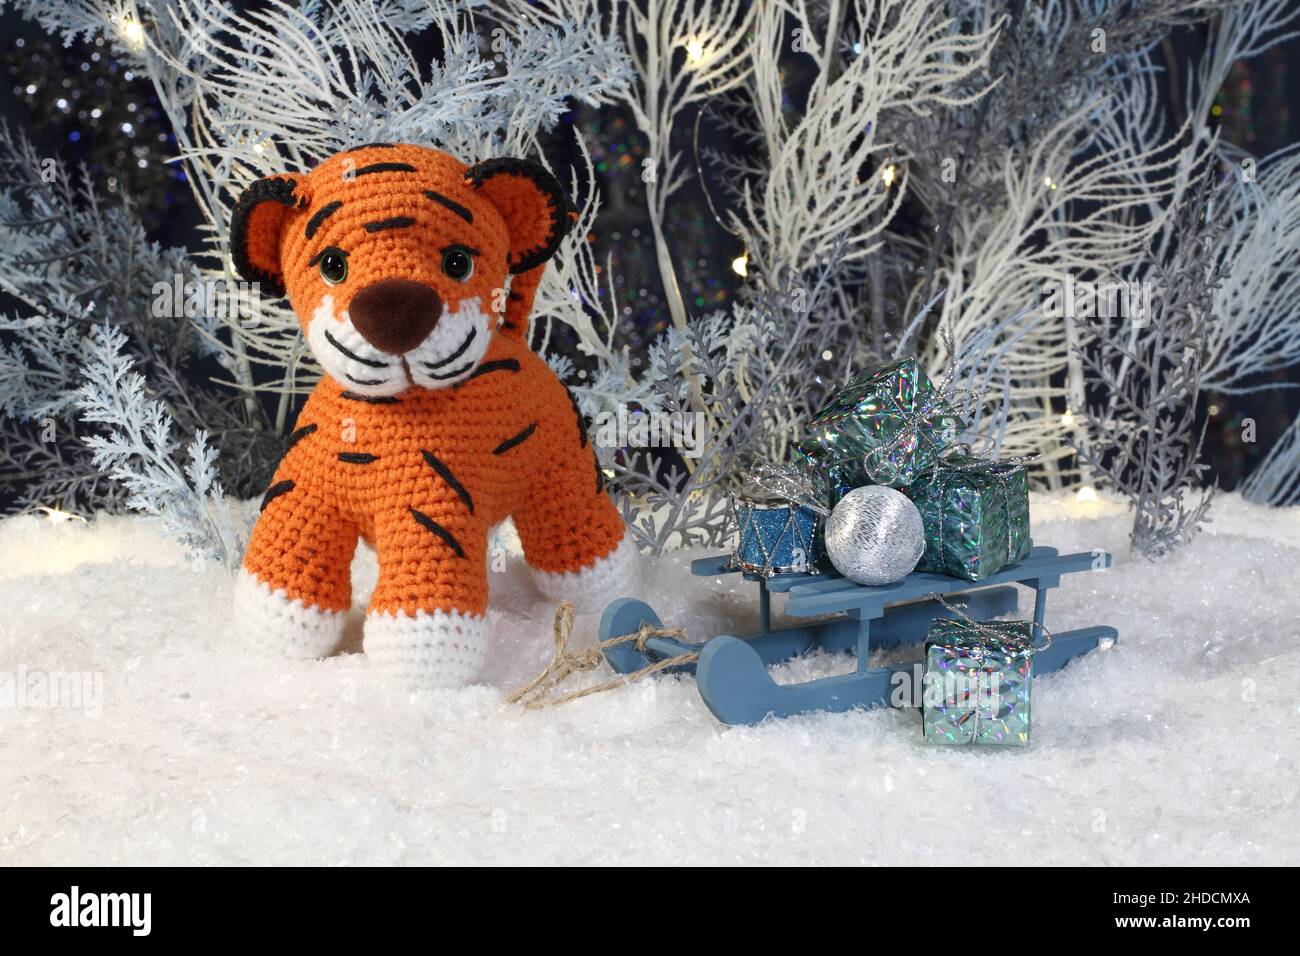 A knitted toy tiger stands on the artificial snow and a toy sled with gifts stands next to him against the backdrop of white and blue artificial trees Stock Photo